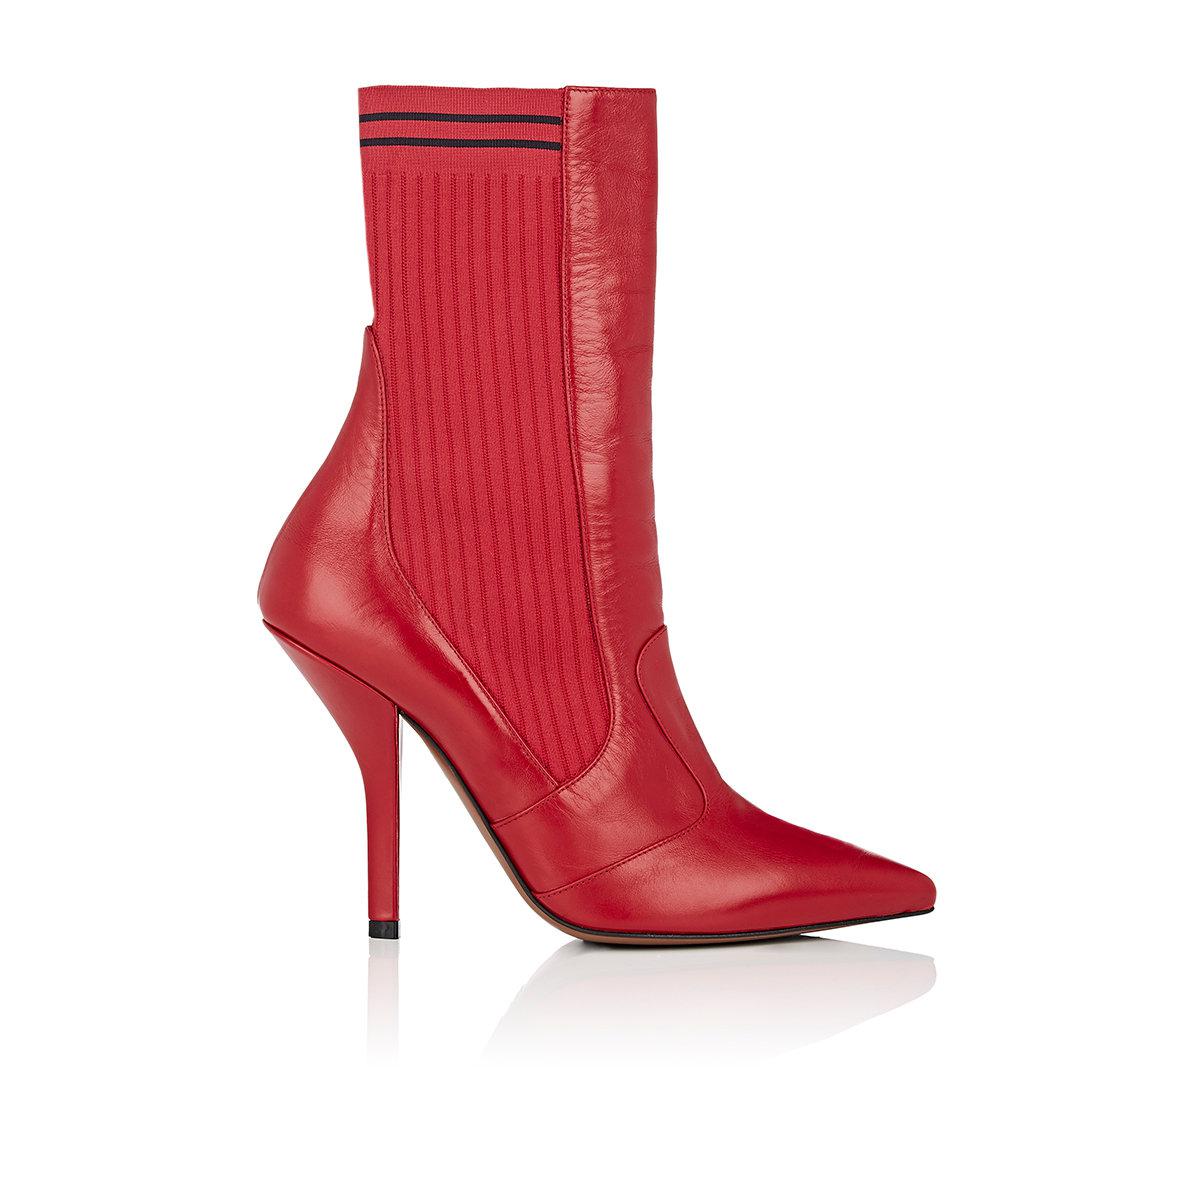 Lyst - Fendi Rockoko Leather Ankle Boots in Red